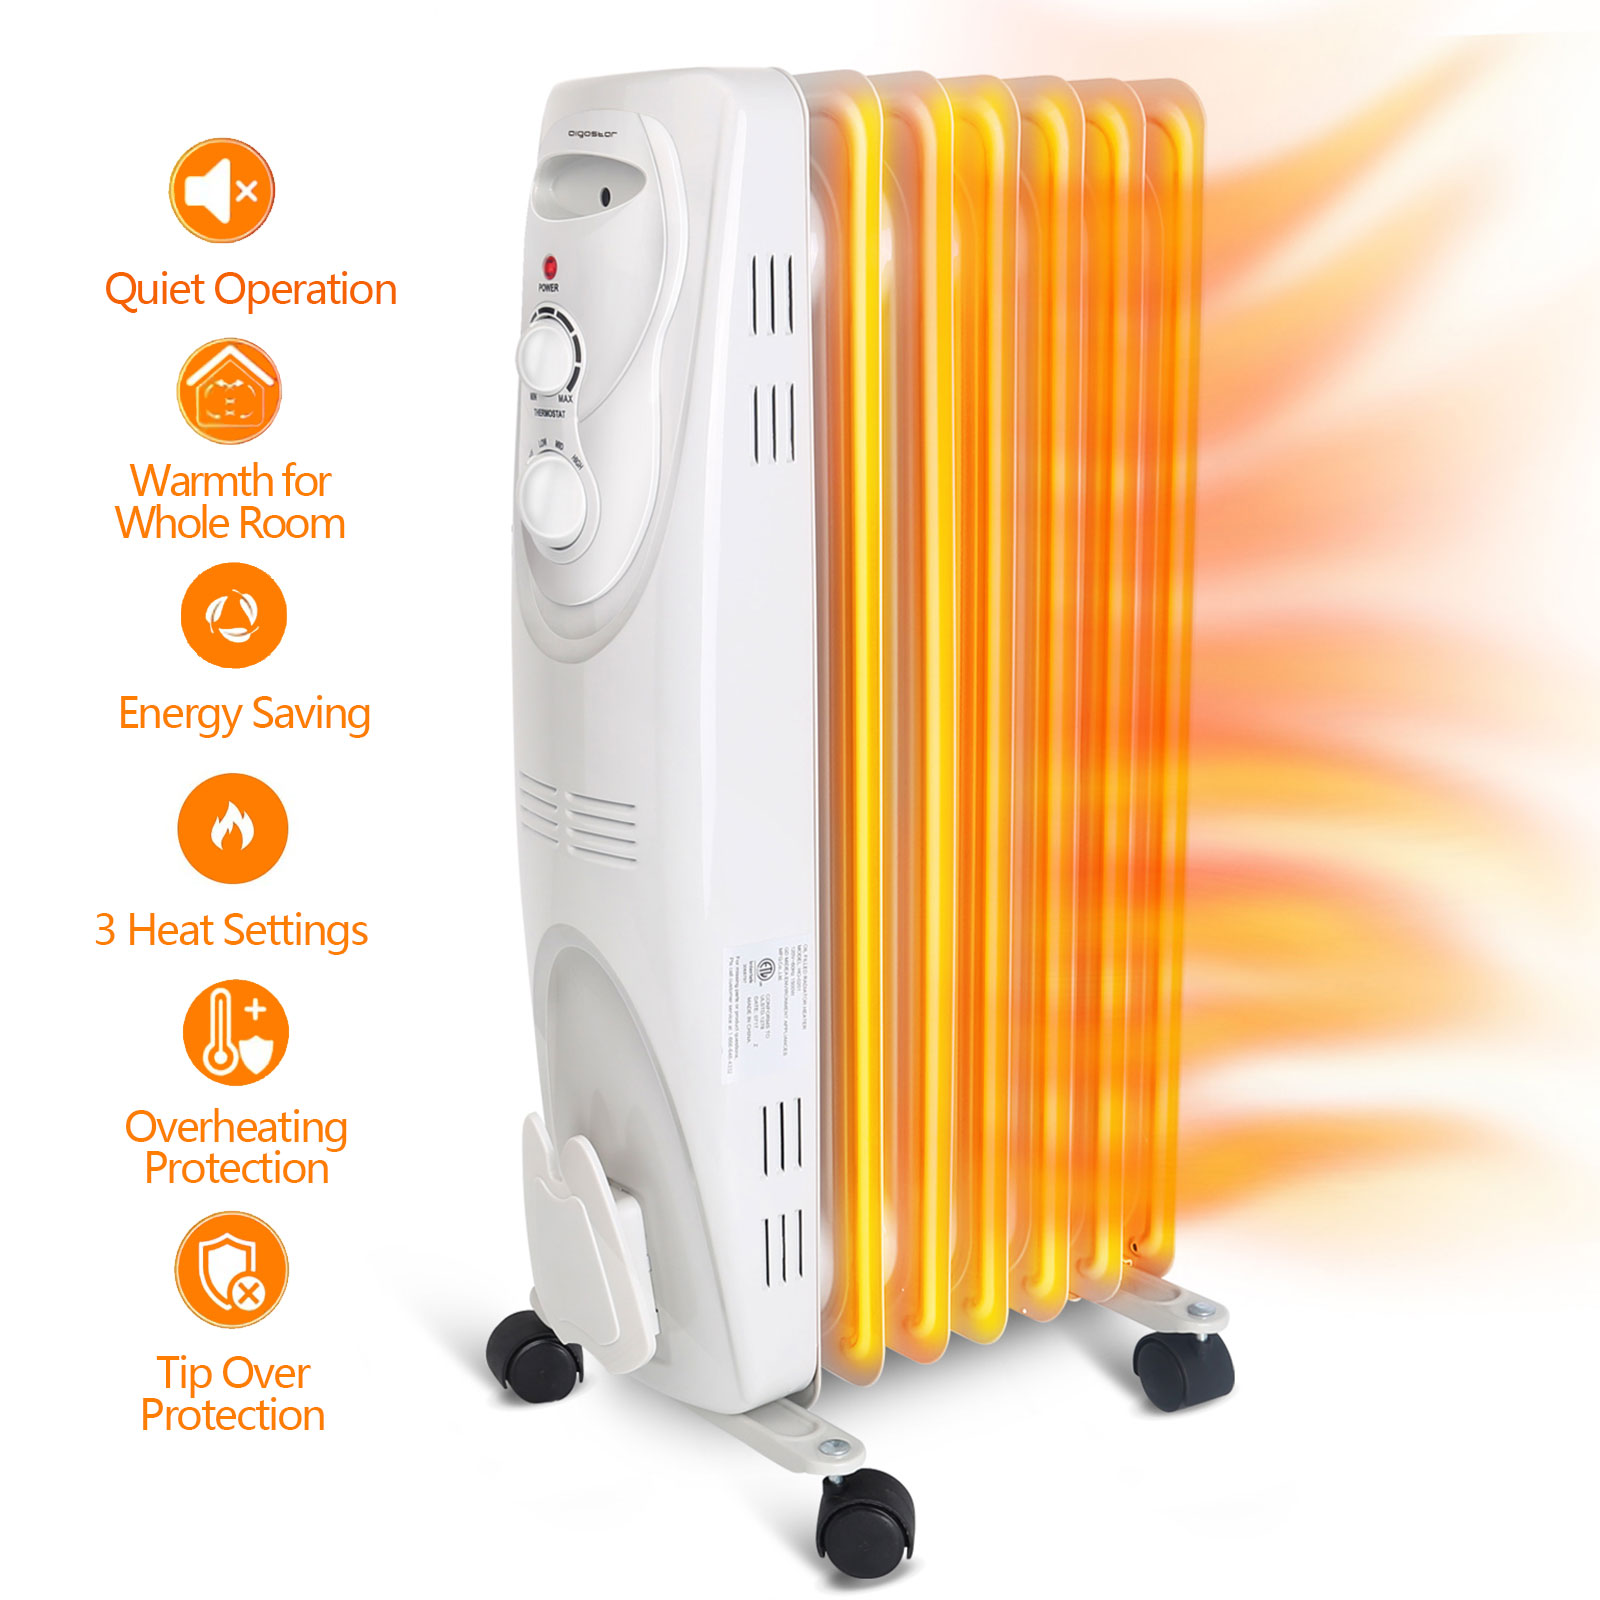 New White Electric 1500w 7 Fin Oil Filled Portable Heater Adjustable Radiator 